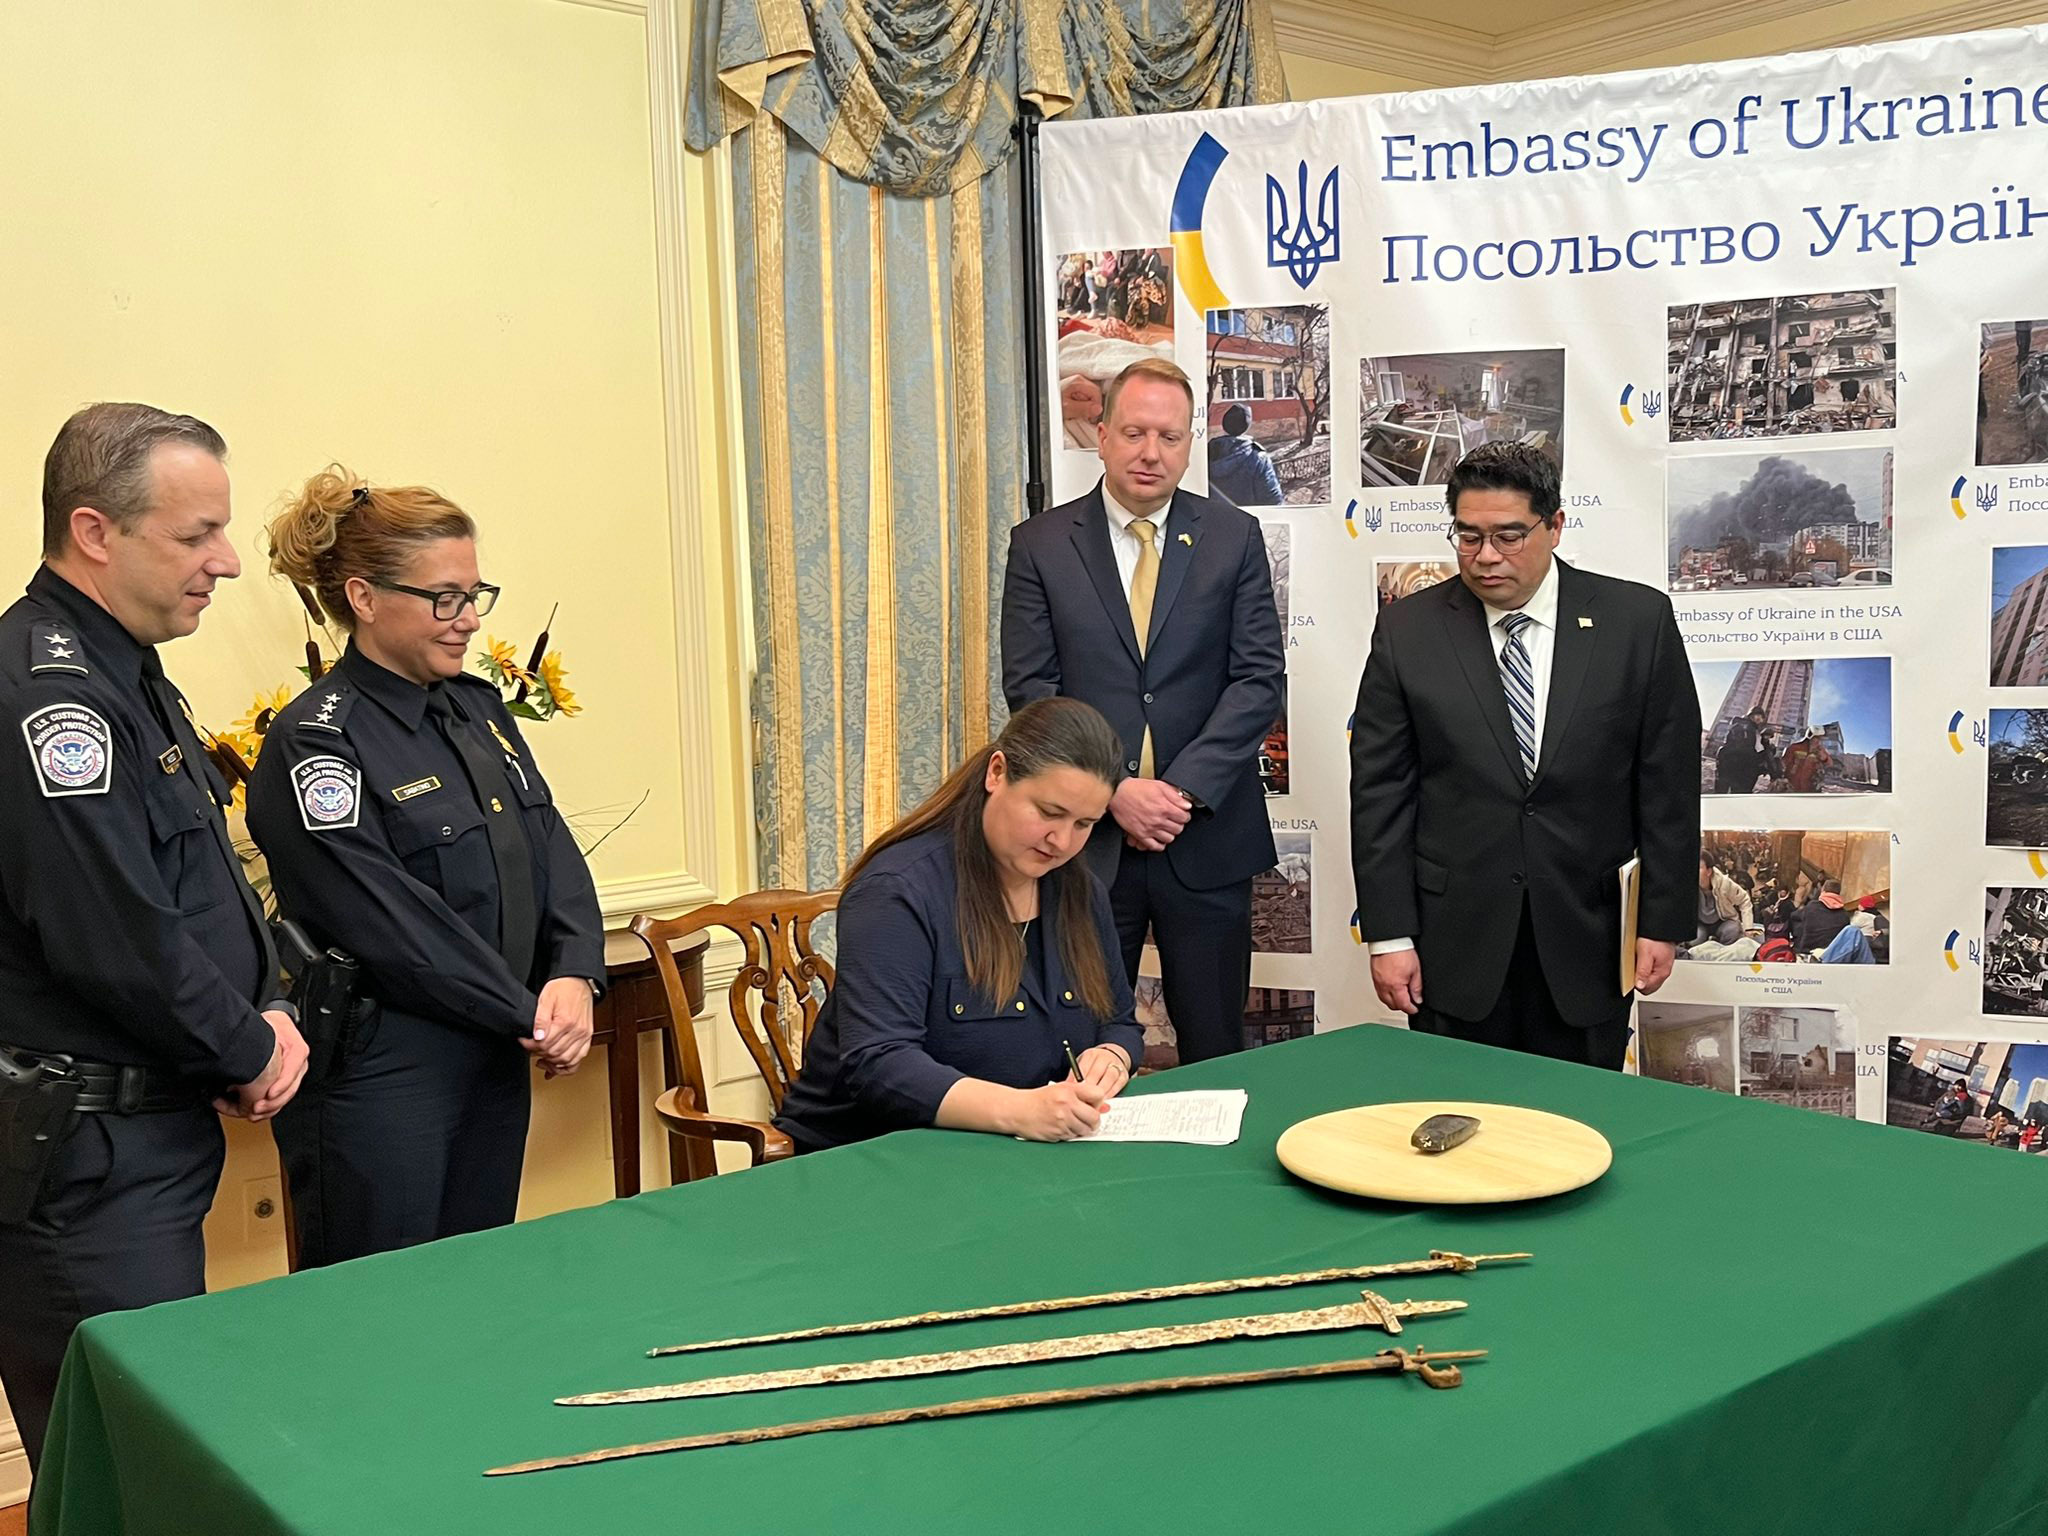 Stolen Ukrainian artifacts attempted to be smuggled into the US were seized by CBP officers and returned to the people of Ukraine, authorities said.